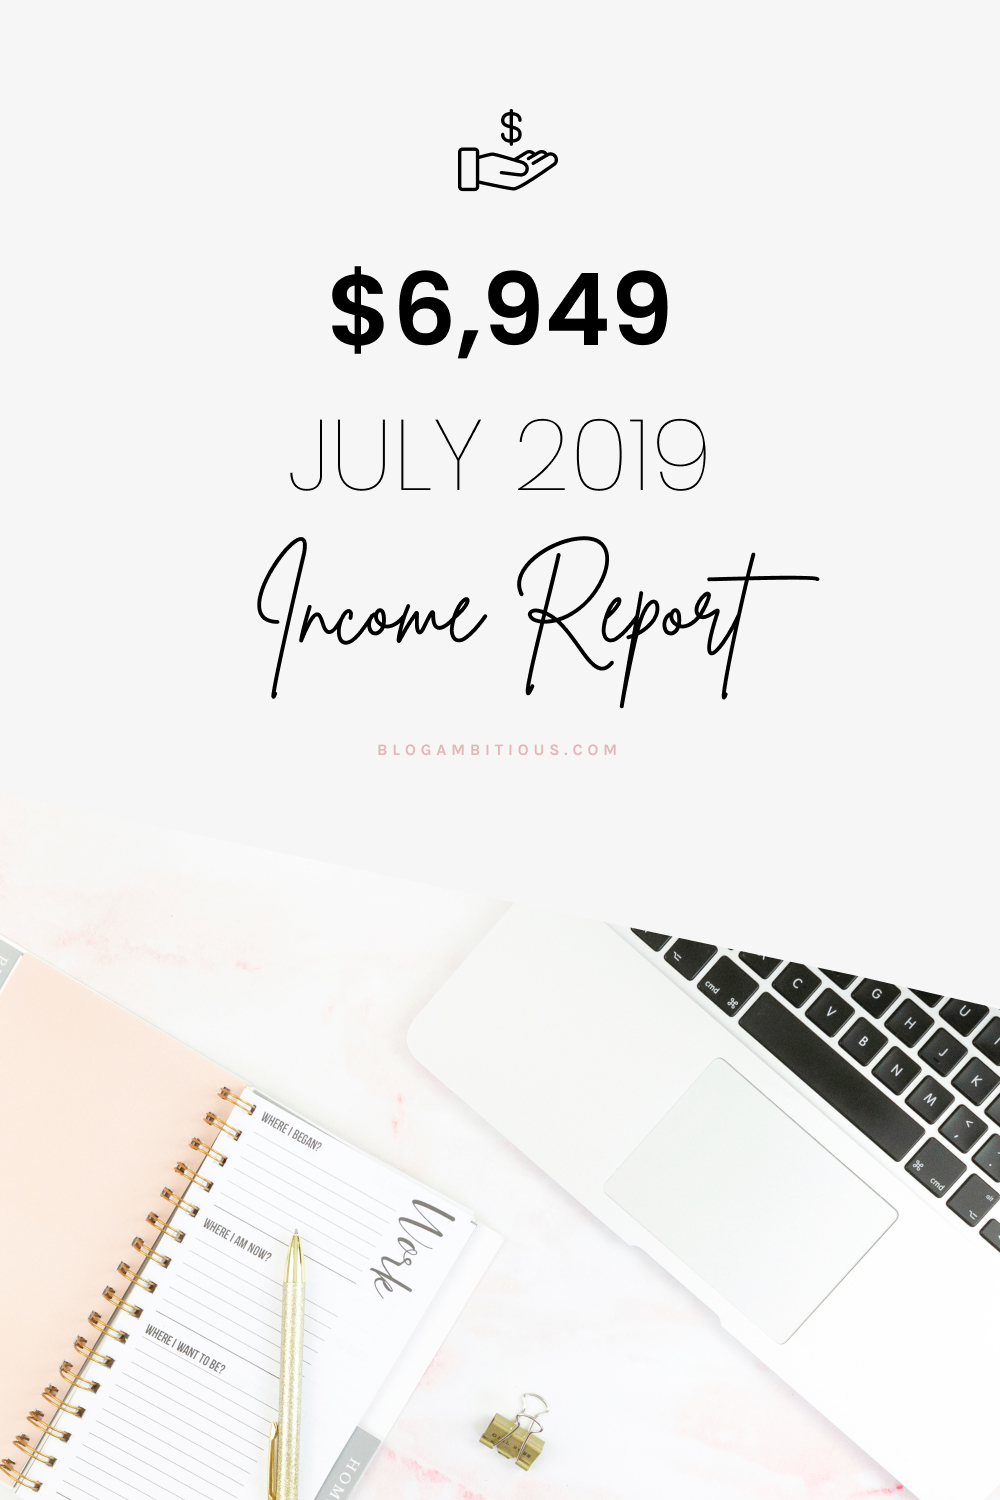 July 2019 Blog Income Report